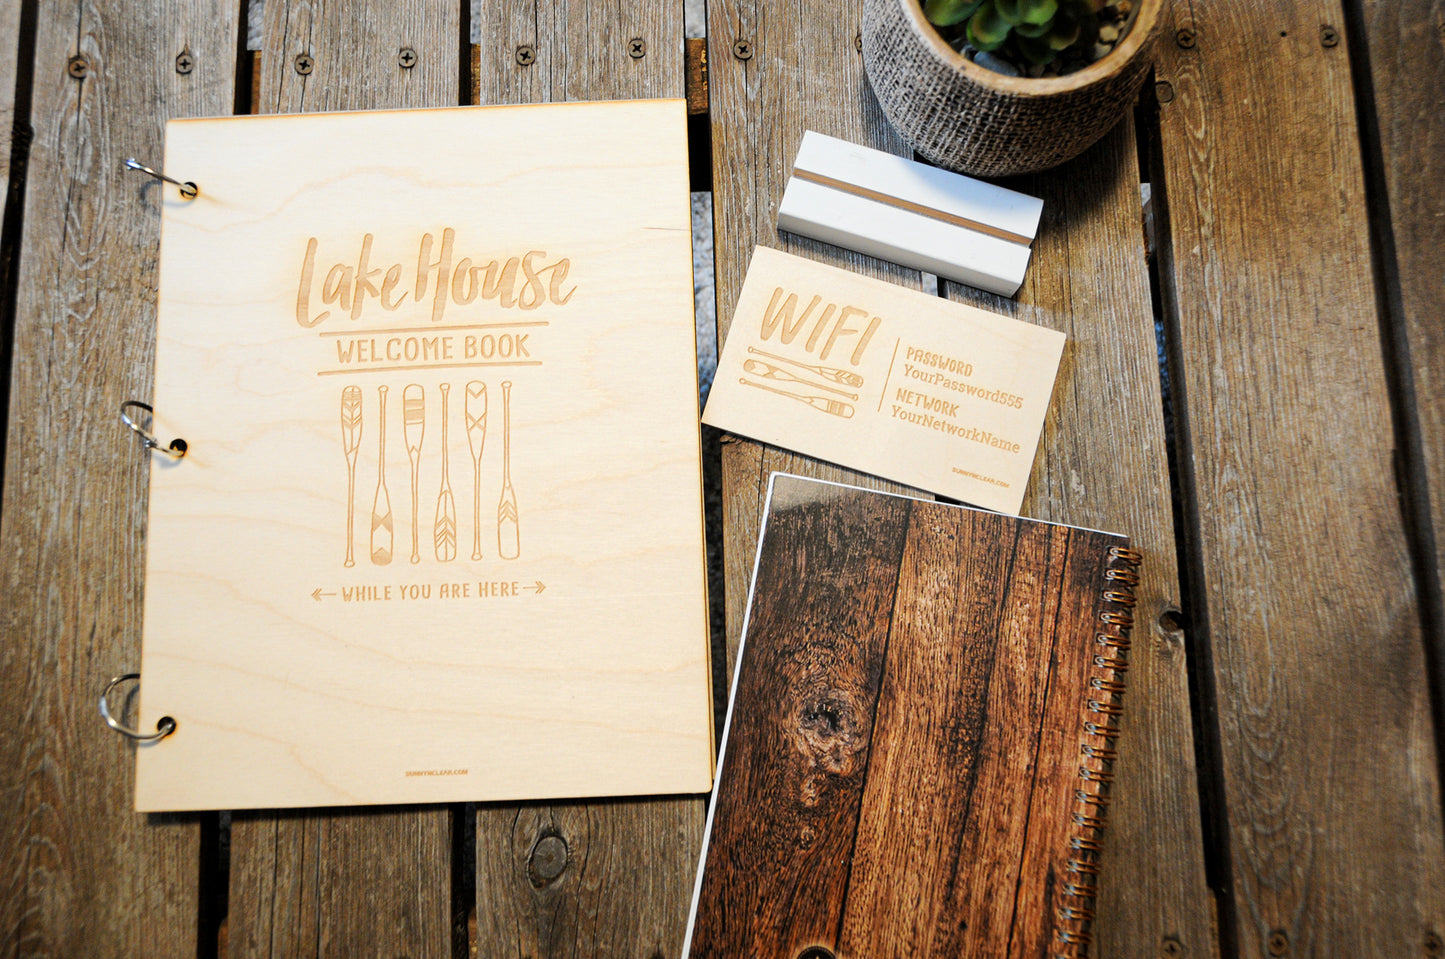 Lake House Bundle - Welcome Book Binder + Guest Book Set + Wifi Sign, VRBO AirBNB